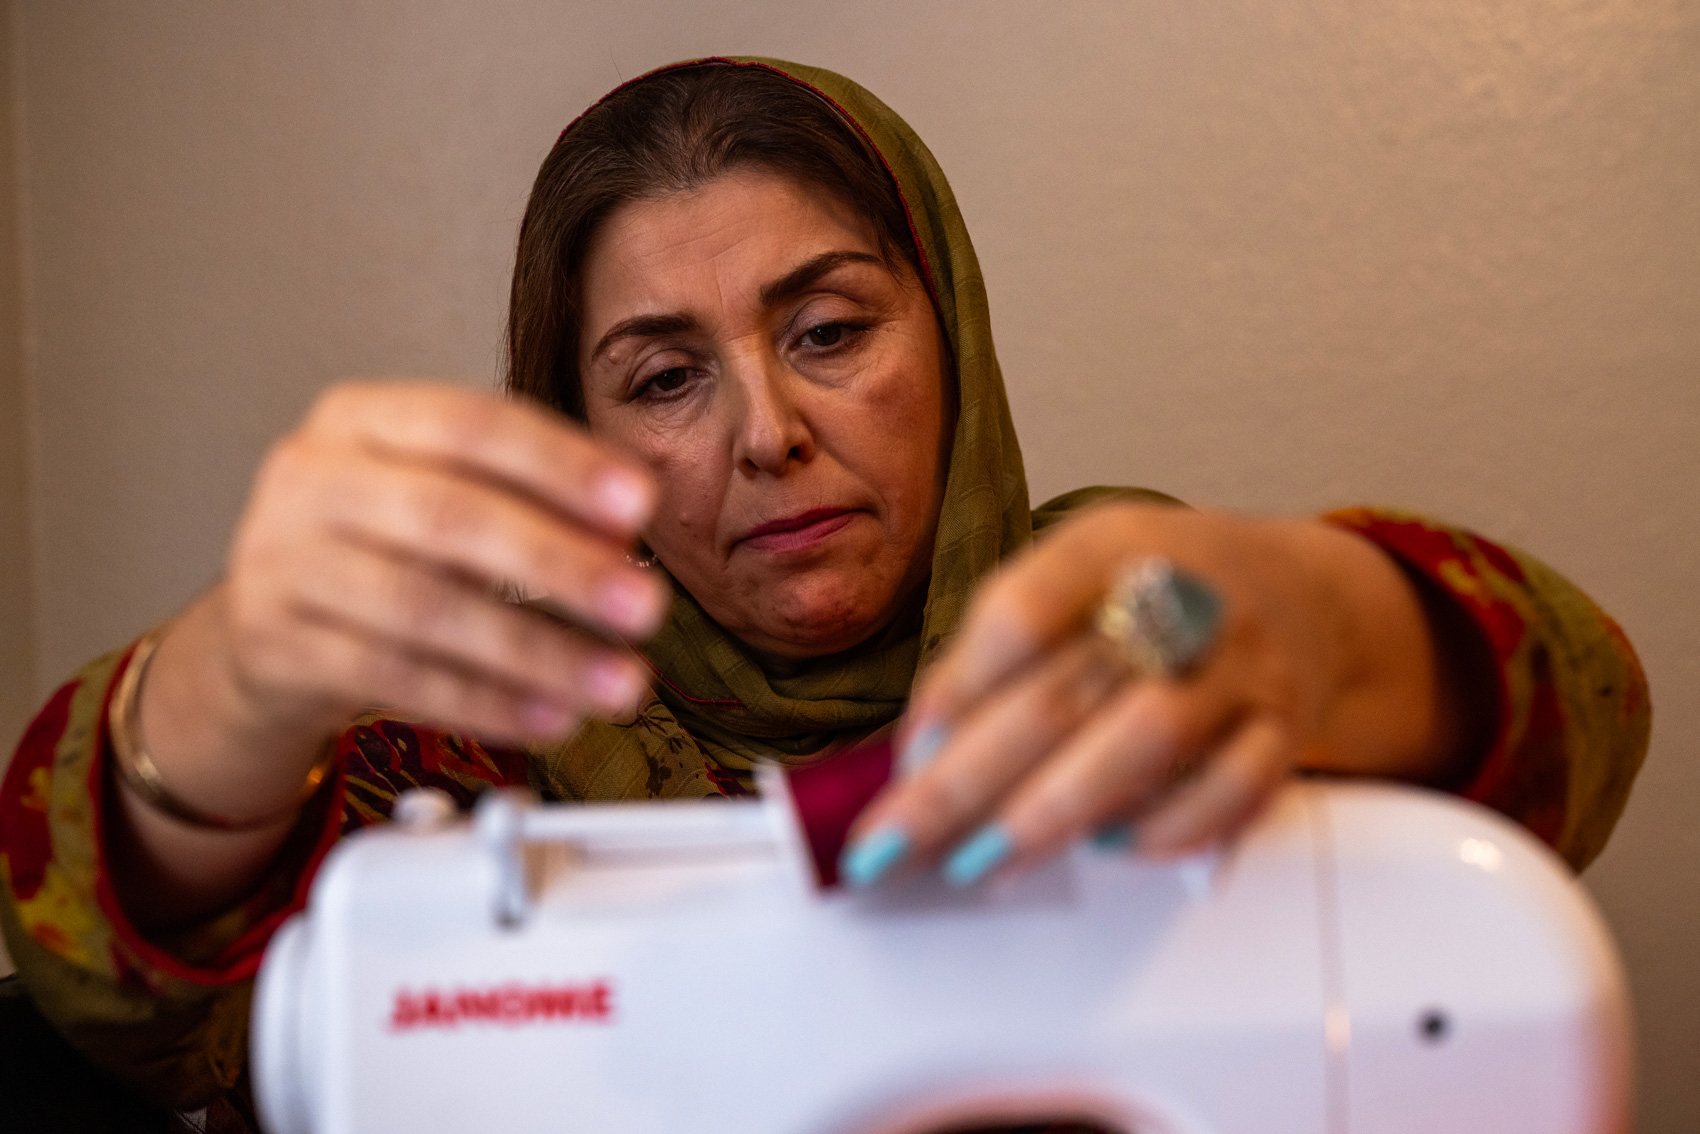 Shukria Barlas puts red thread into a sewing machine during a sewing class